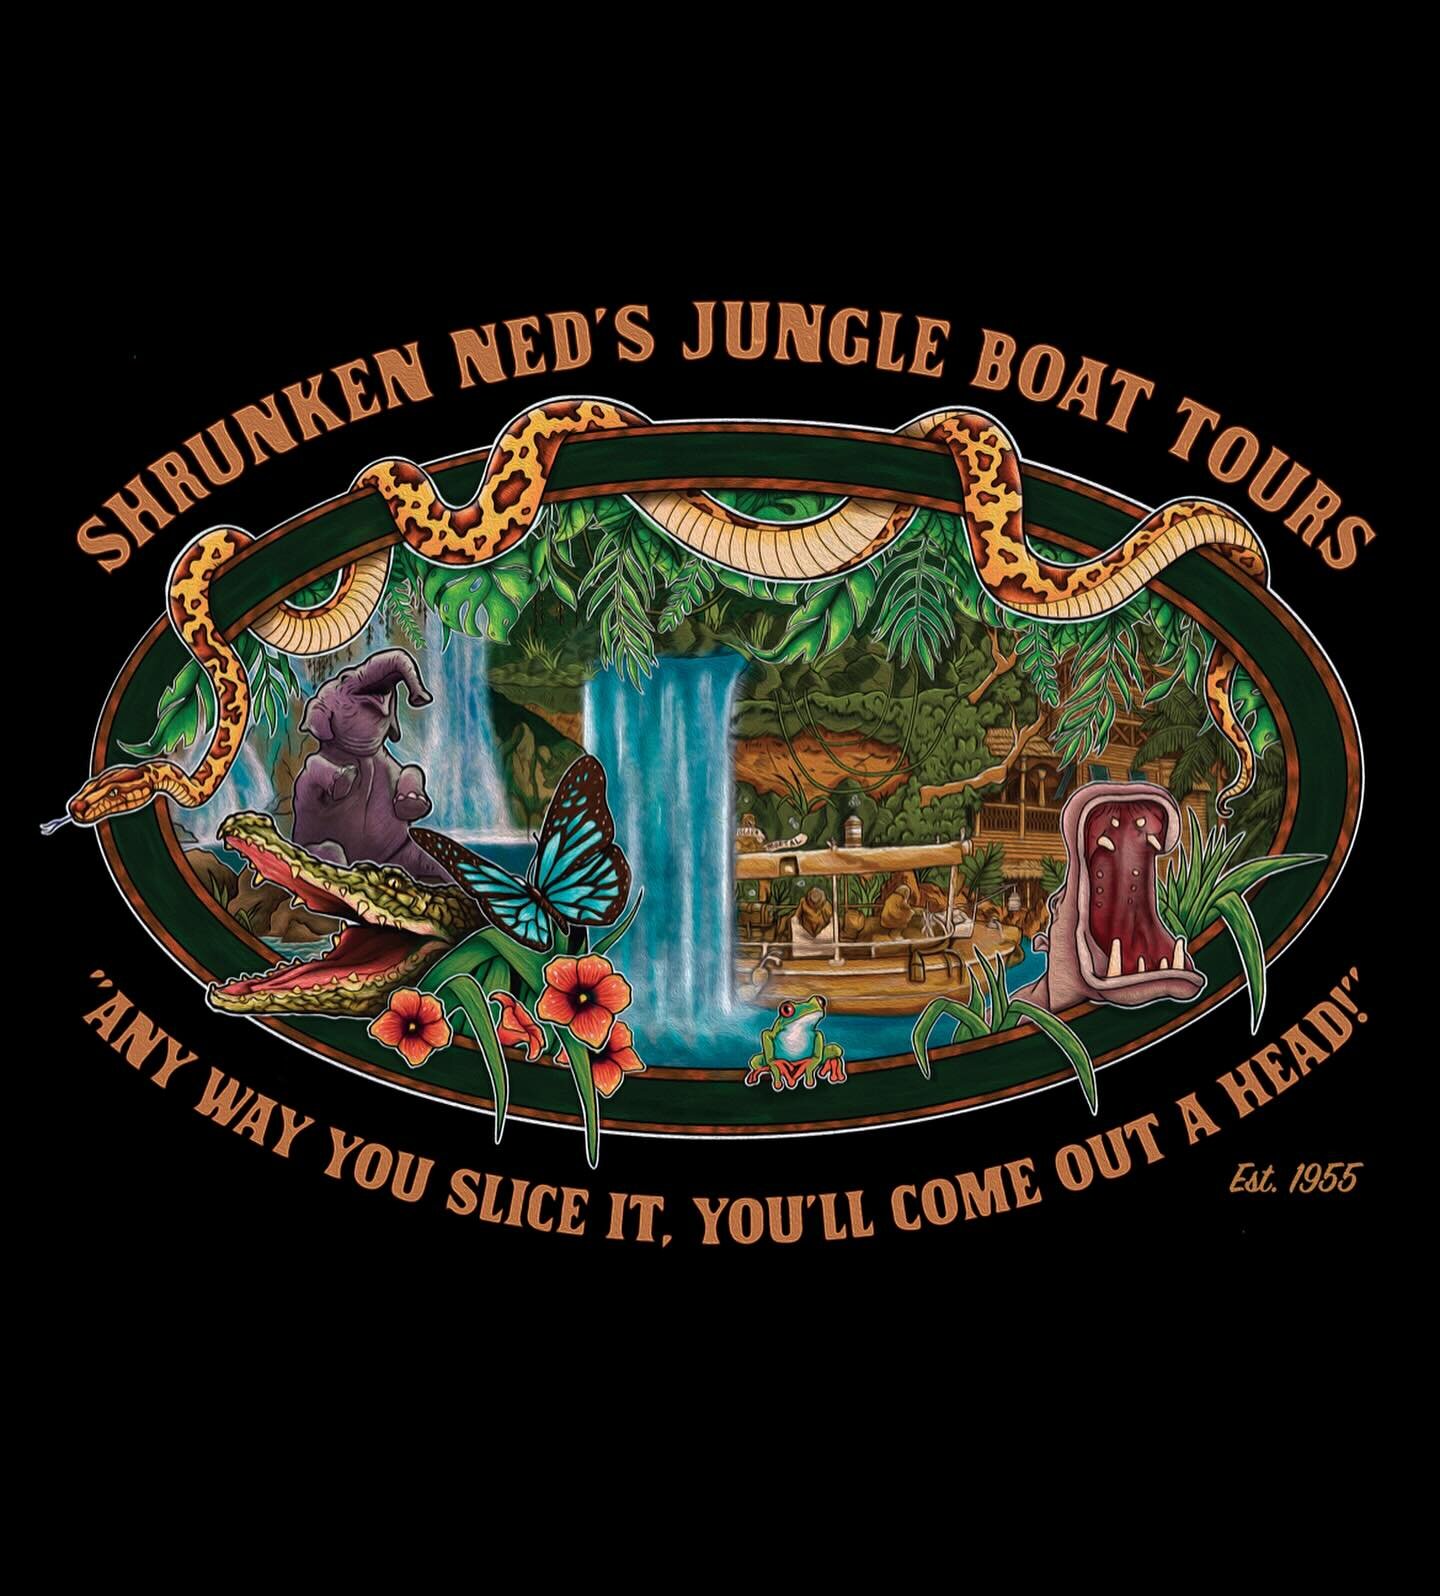 After FAR too long working on this in the background of other projects, Im happy to finally show my new take on an old @foolishmortalsupplyco design. &ldquo;Shrunken Ned&rsquo;s Jungle Boat Tours&rdquo;

🌴😵🌴

&ldquo;Any way you slice it, you&rsquo